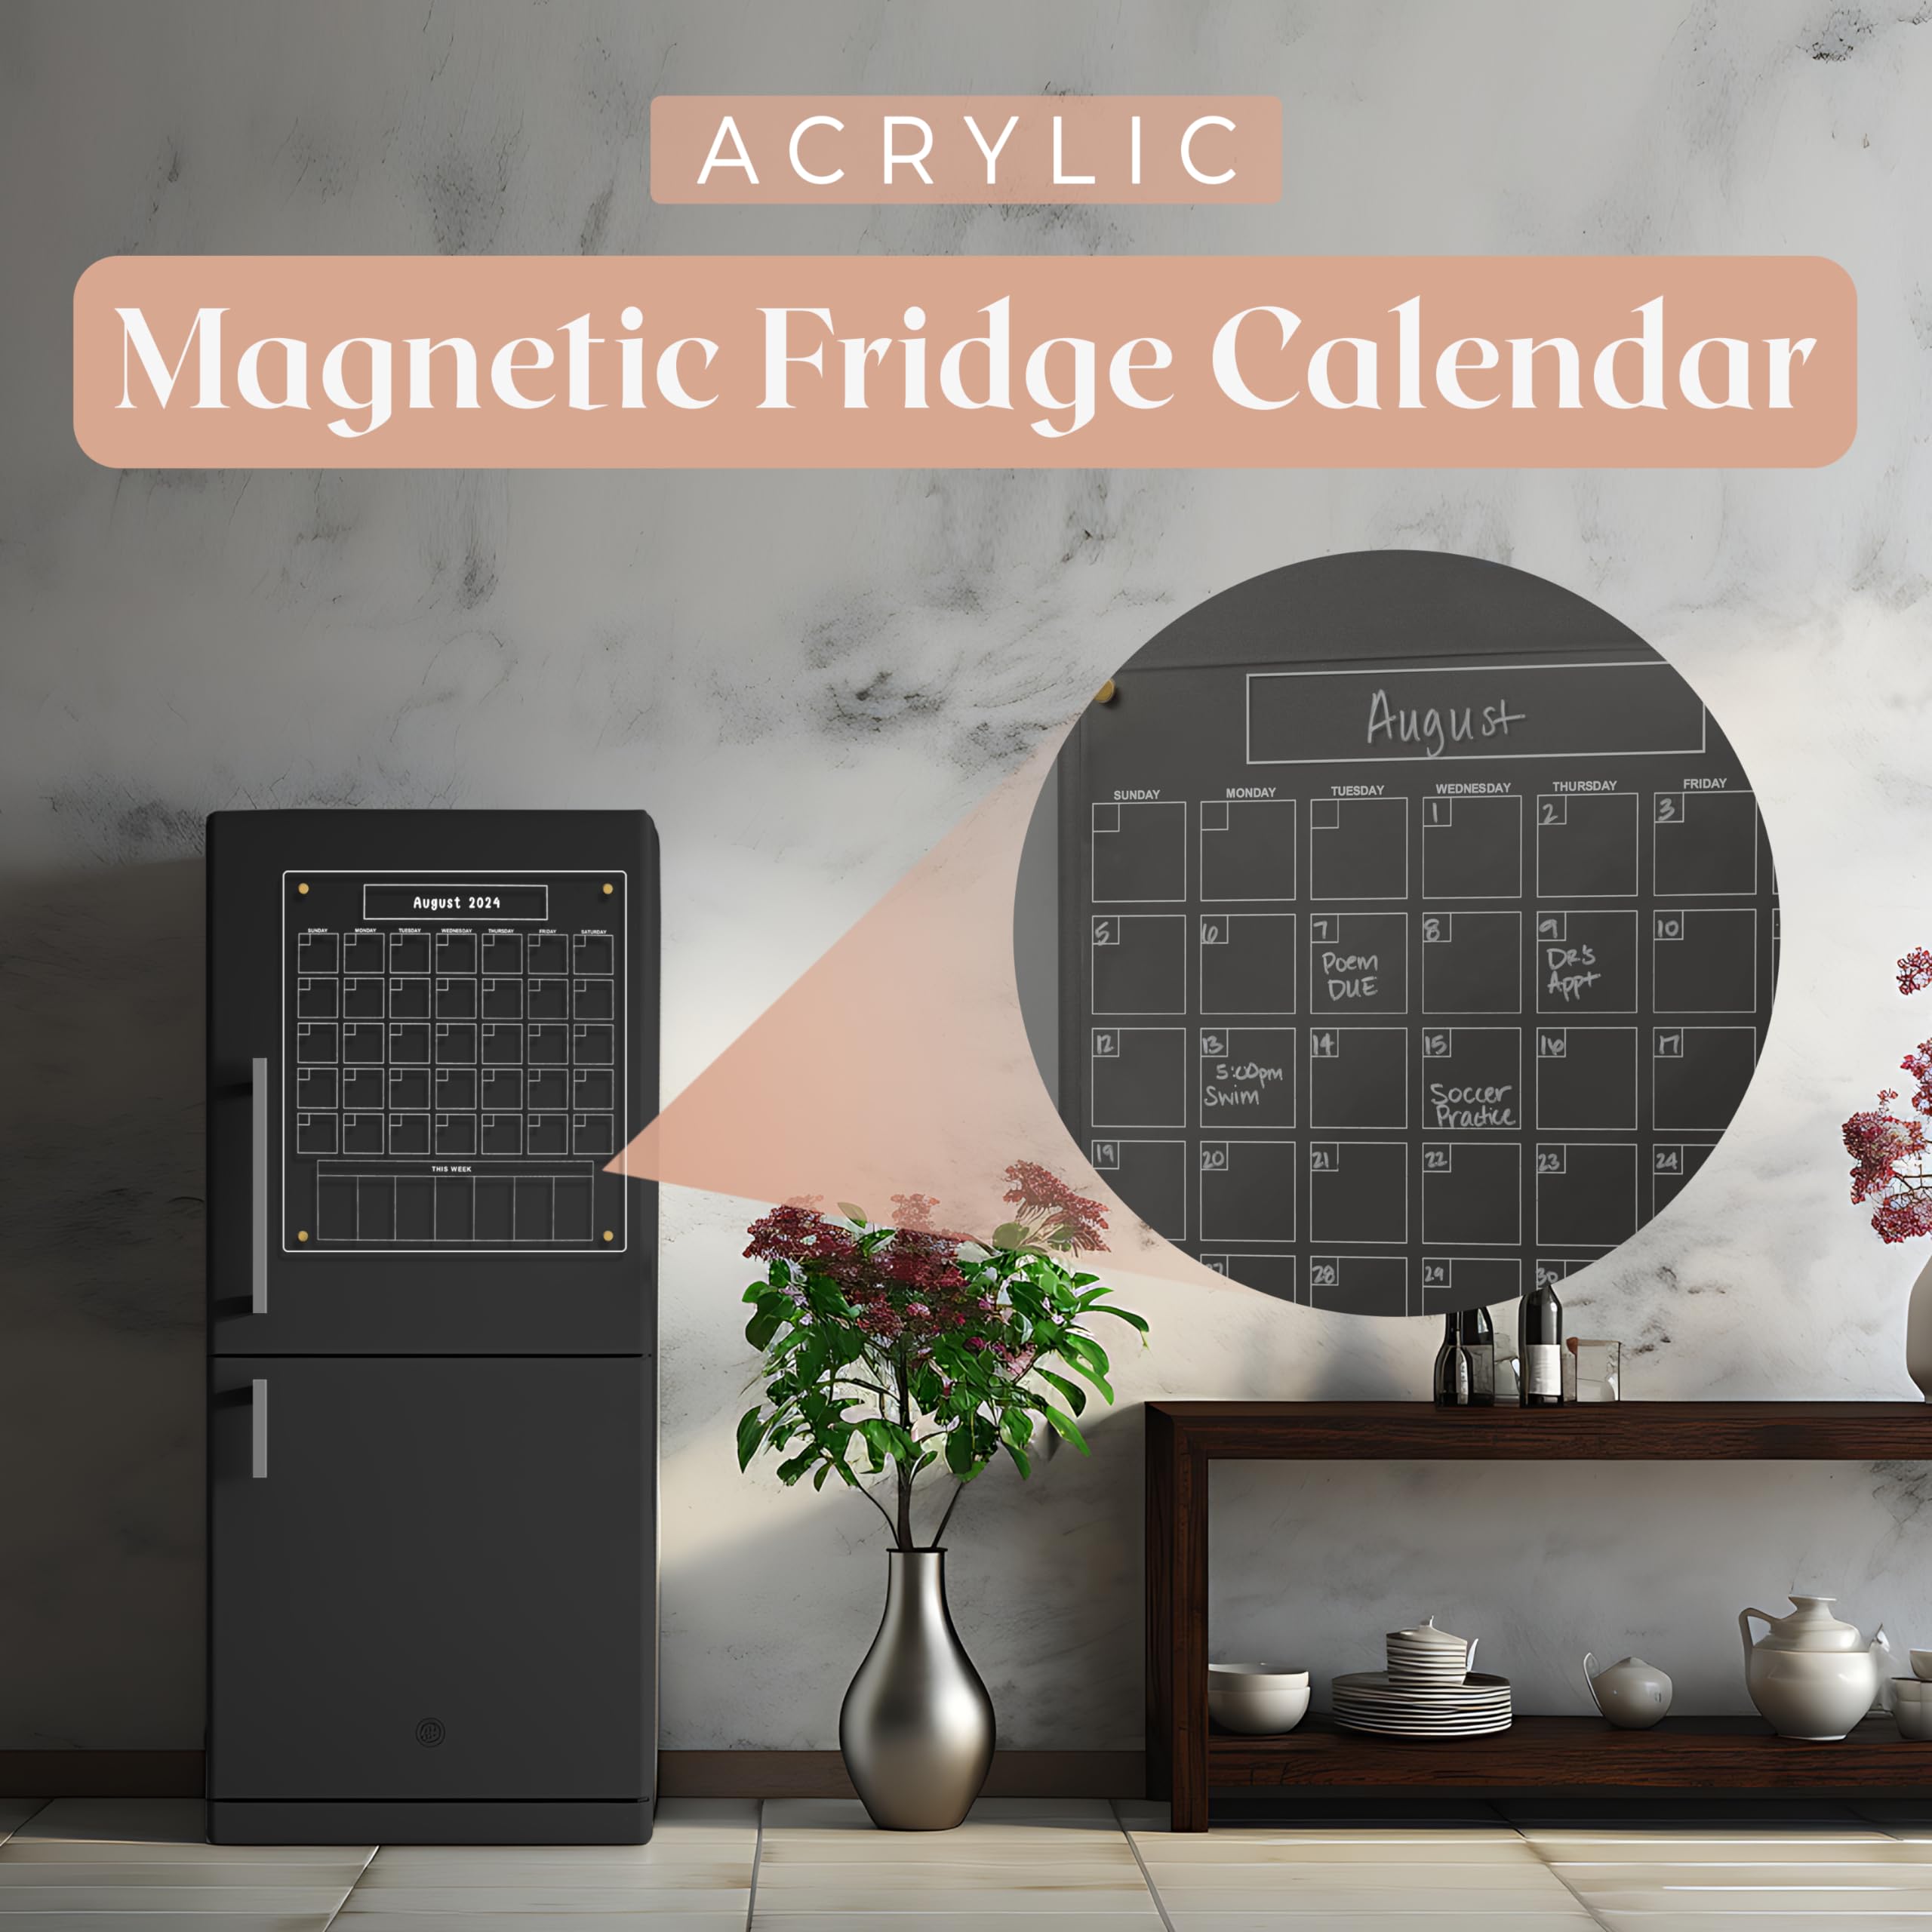 AJA House Acrylic Magnetic Fridge Calendar - Clear Refrigerator Dry Erase Board Calendar | Magnetic Monthly Grid And Weekly Planner Section | 15’’x17’’ Vertical Fridge Calendar | Gold Magnets